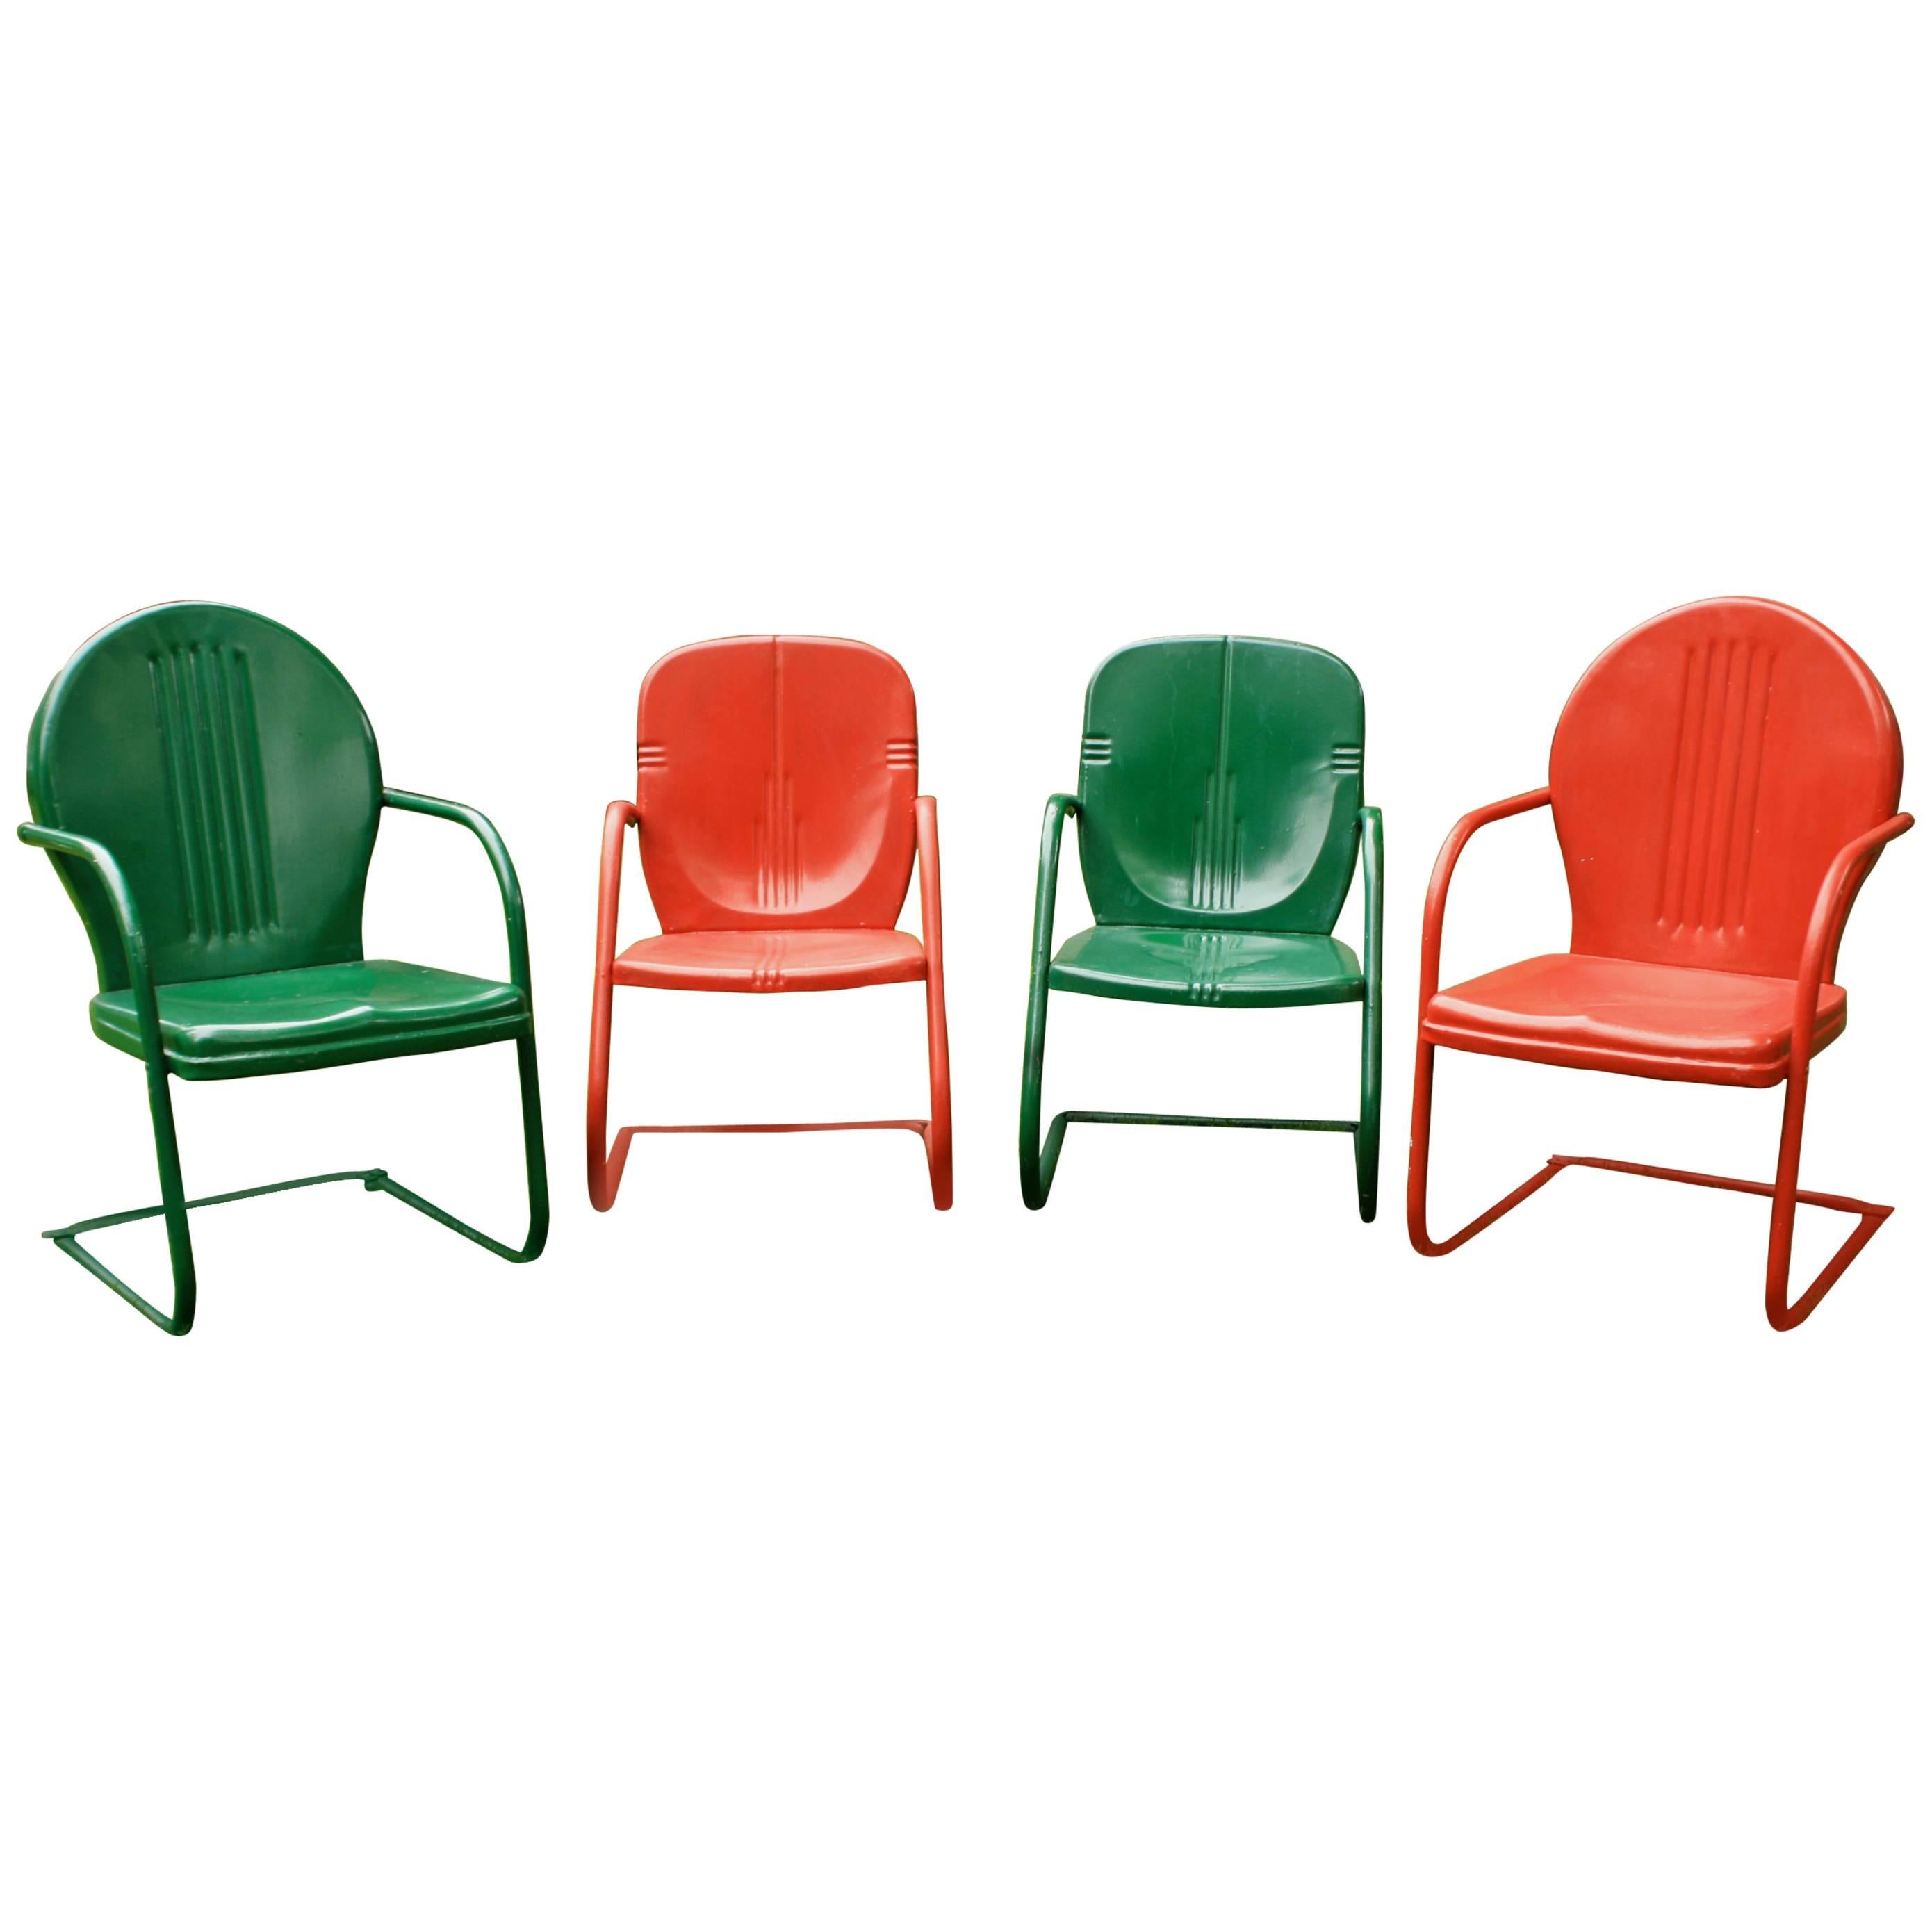 Set of Four Painted Metal Vintage Patio or Garden Chairs